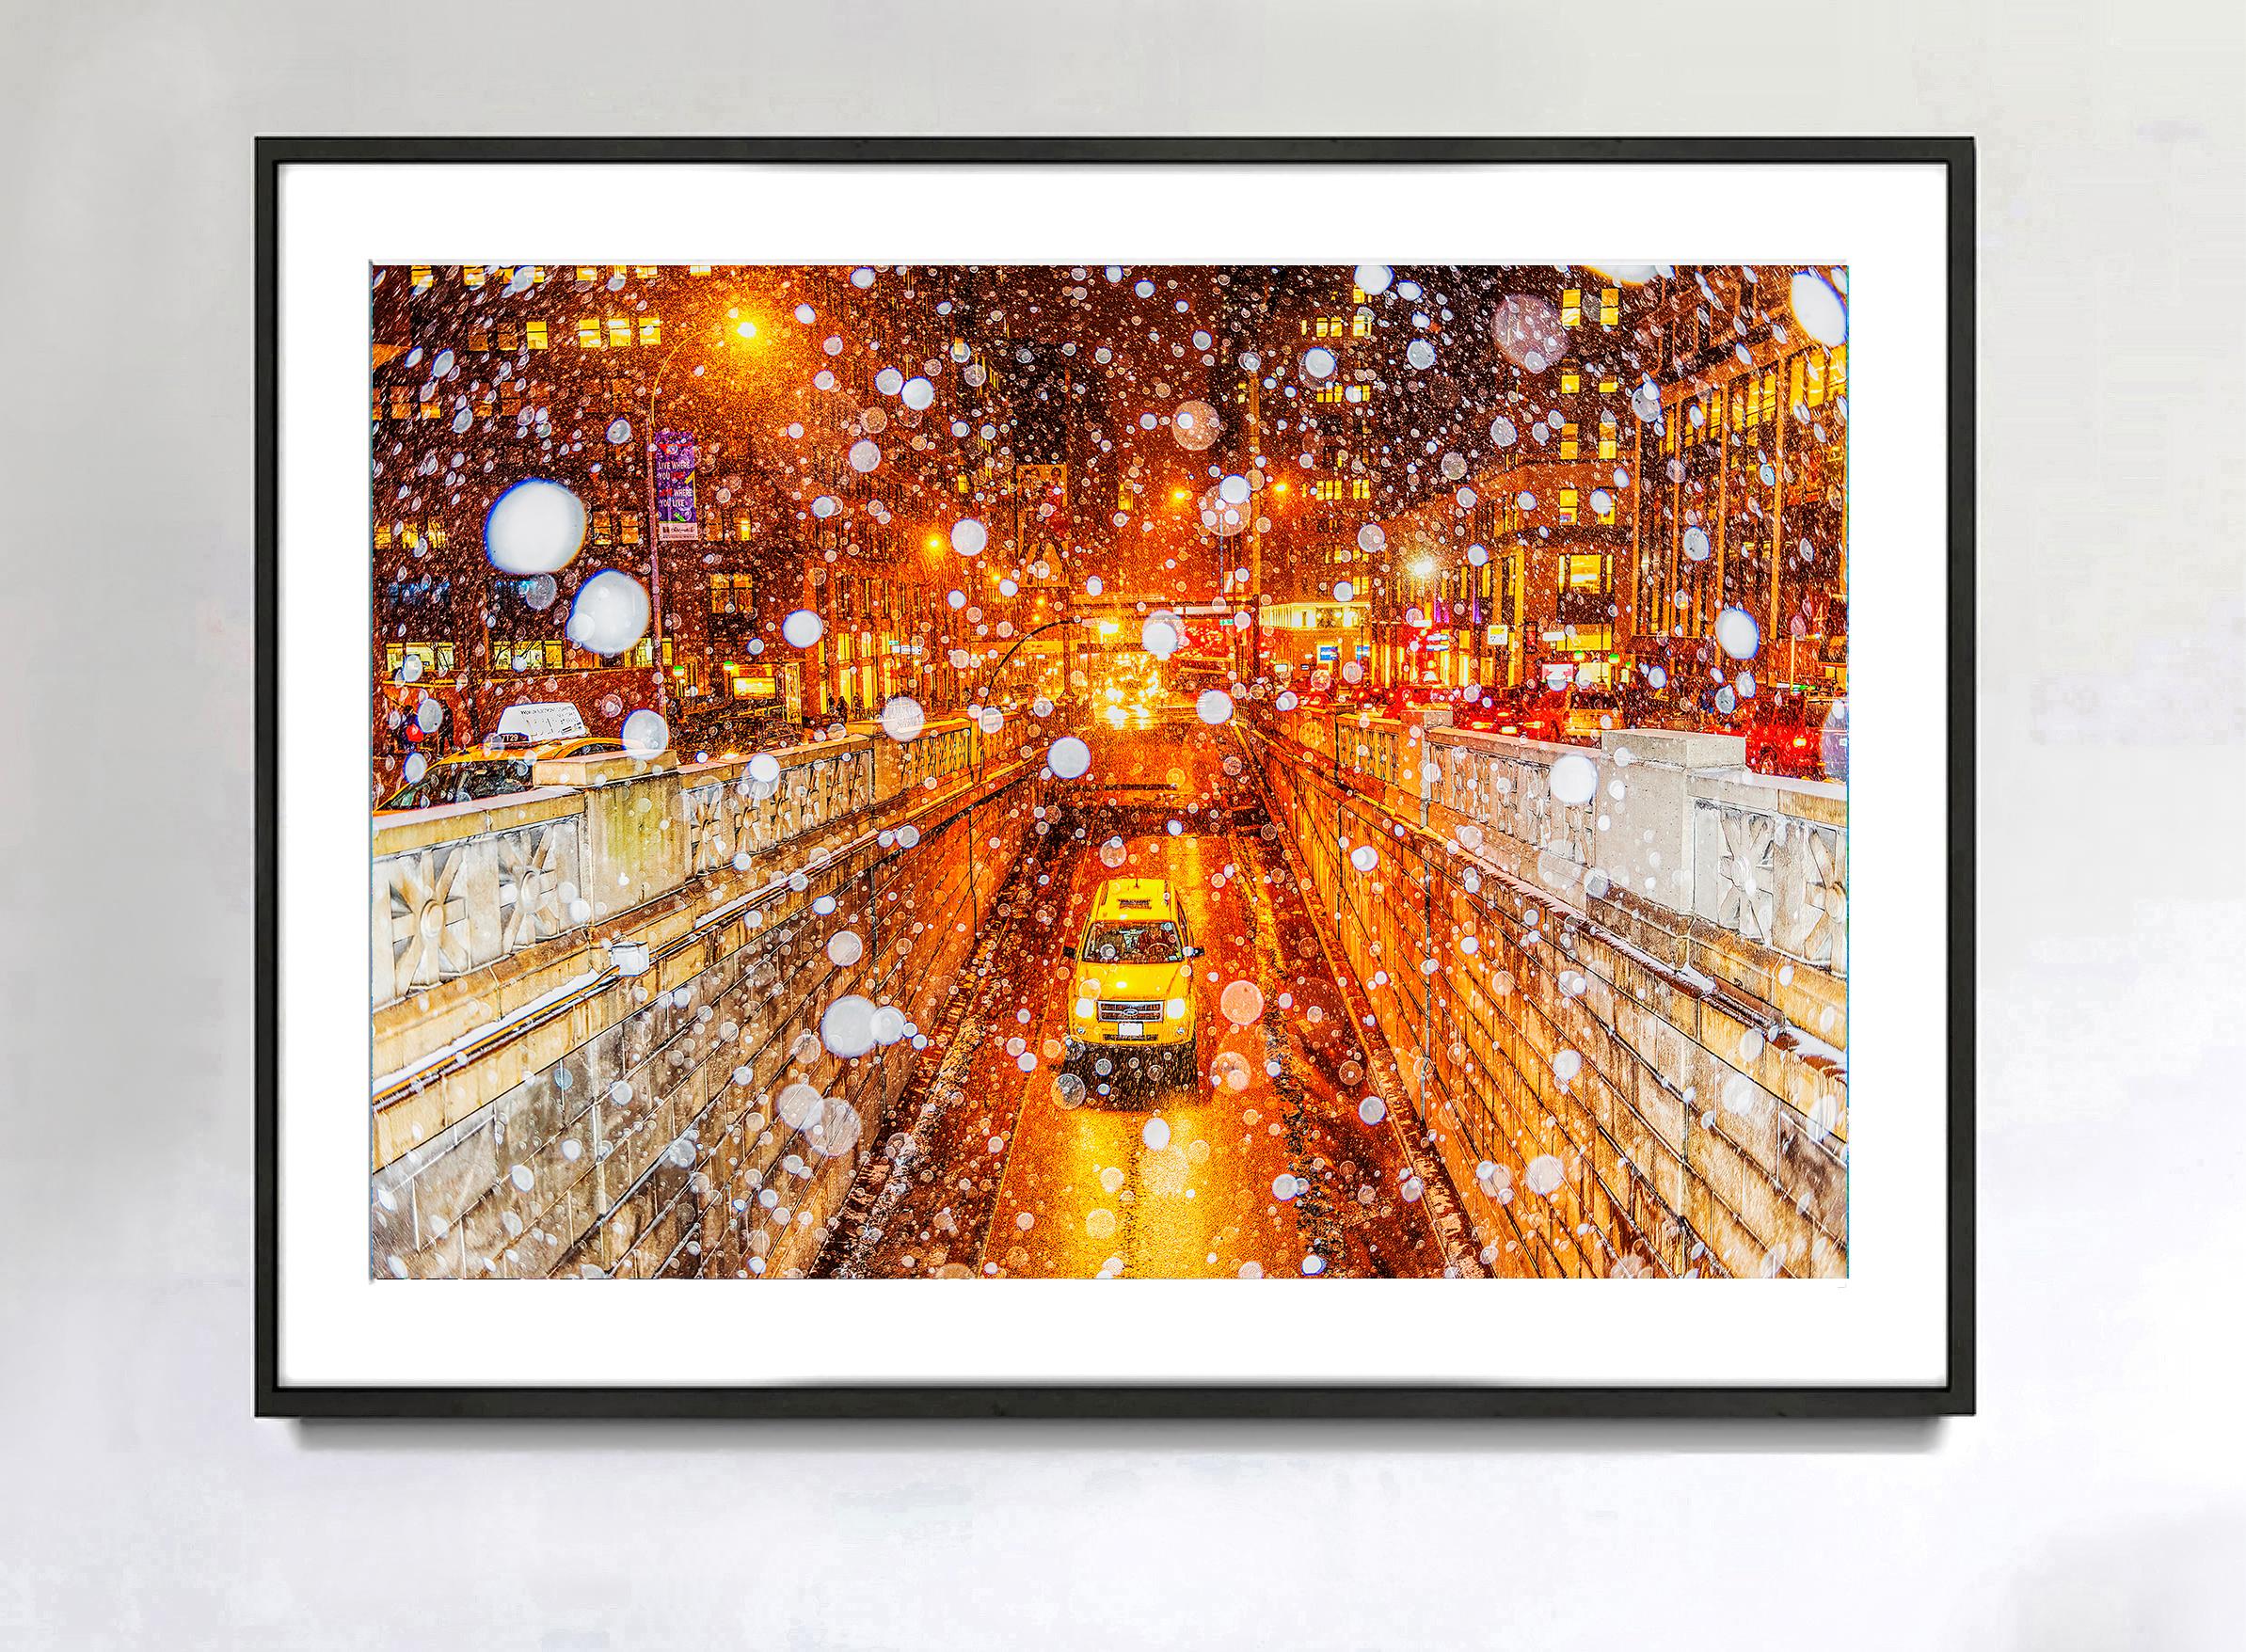 Manhattan in Snow Storm - Golden Abstraction  - Abstract Expressionist Photograph by Mitchell Funk